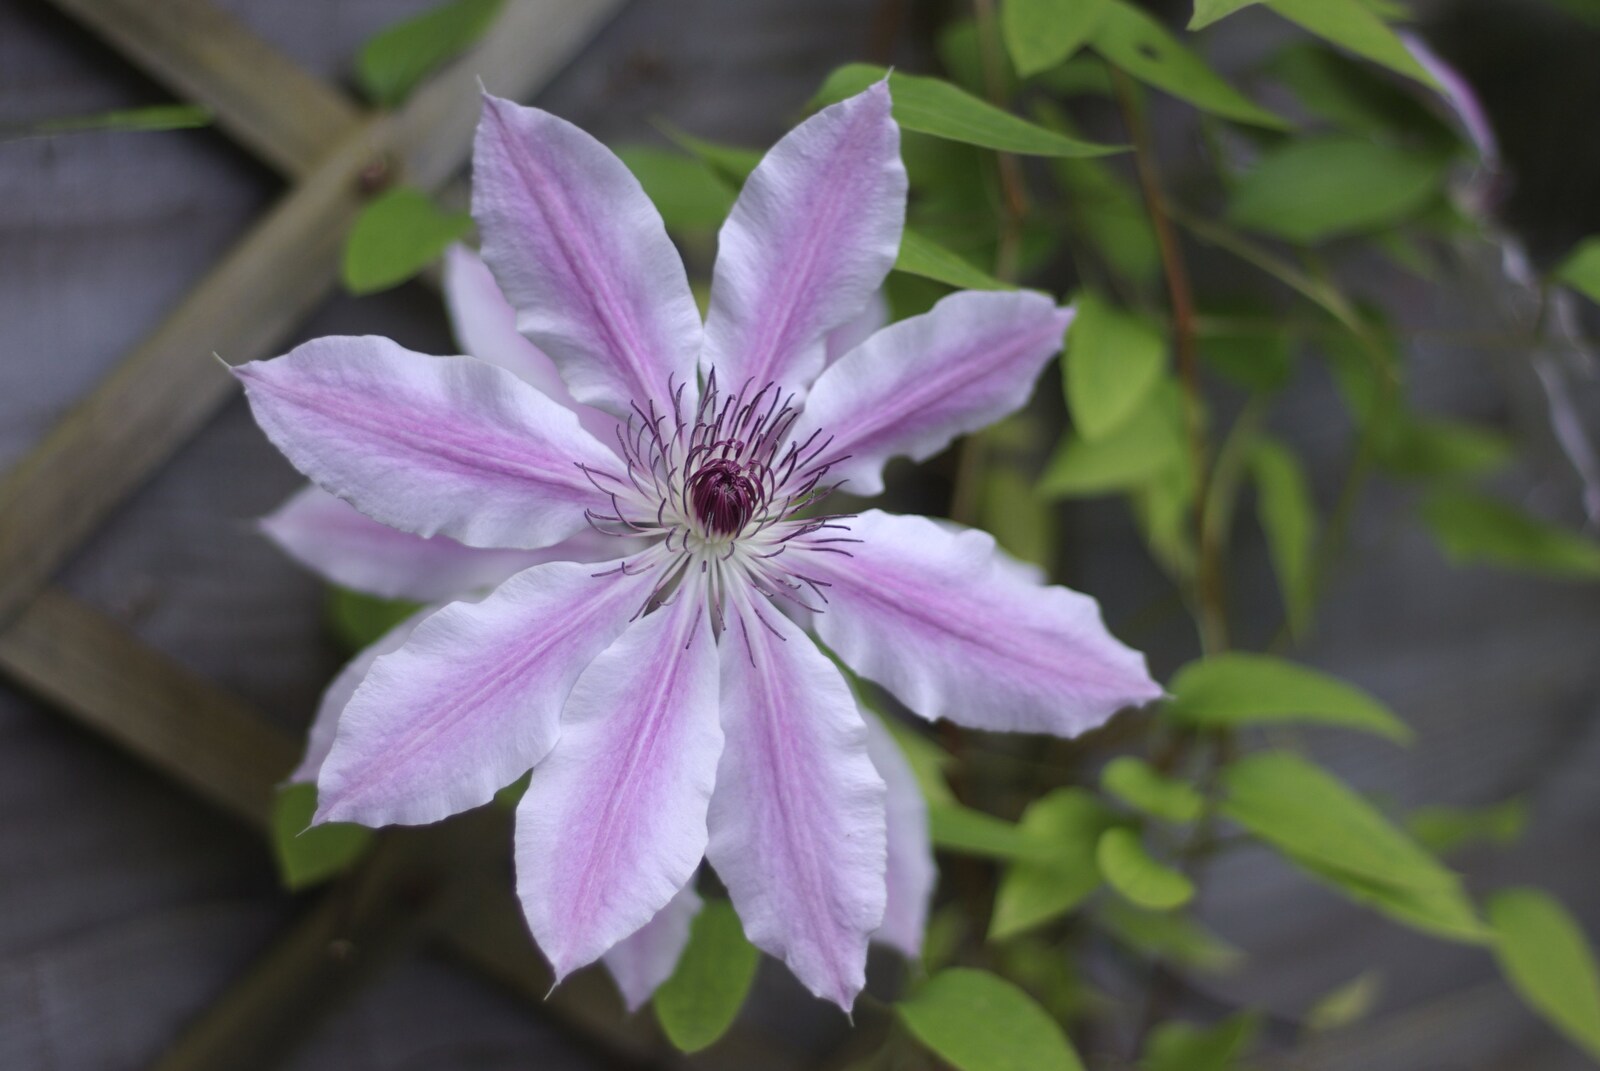 A nicely-open clematis flower from May Miscellany: London, Louise's Birthday, Norwich, and Steve Winwood, Islington and Cambridge - May 2007